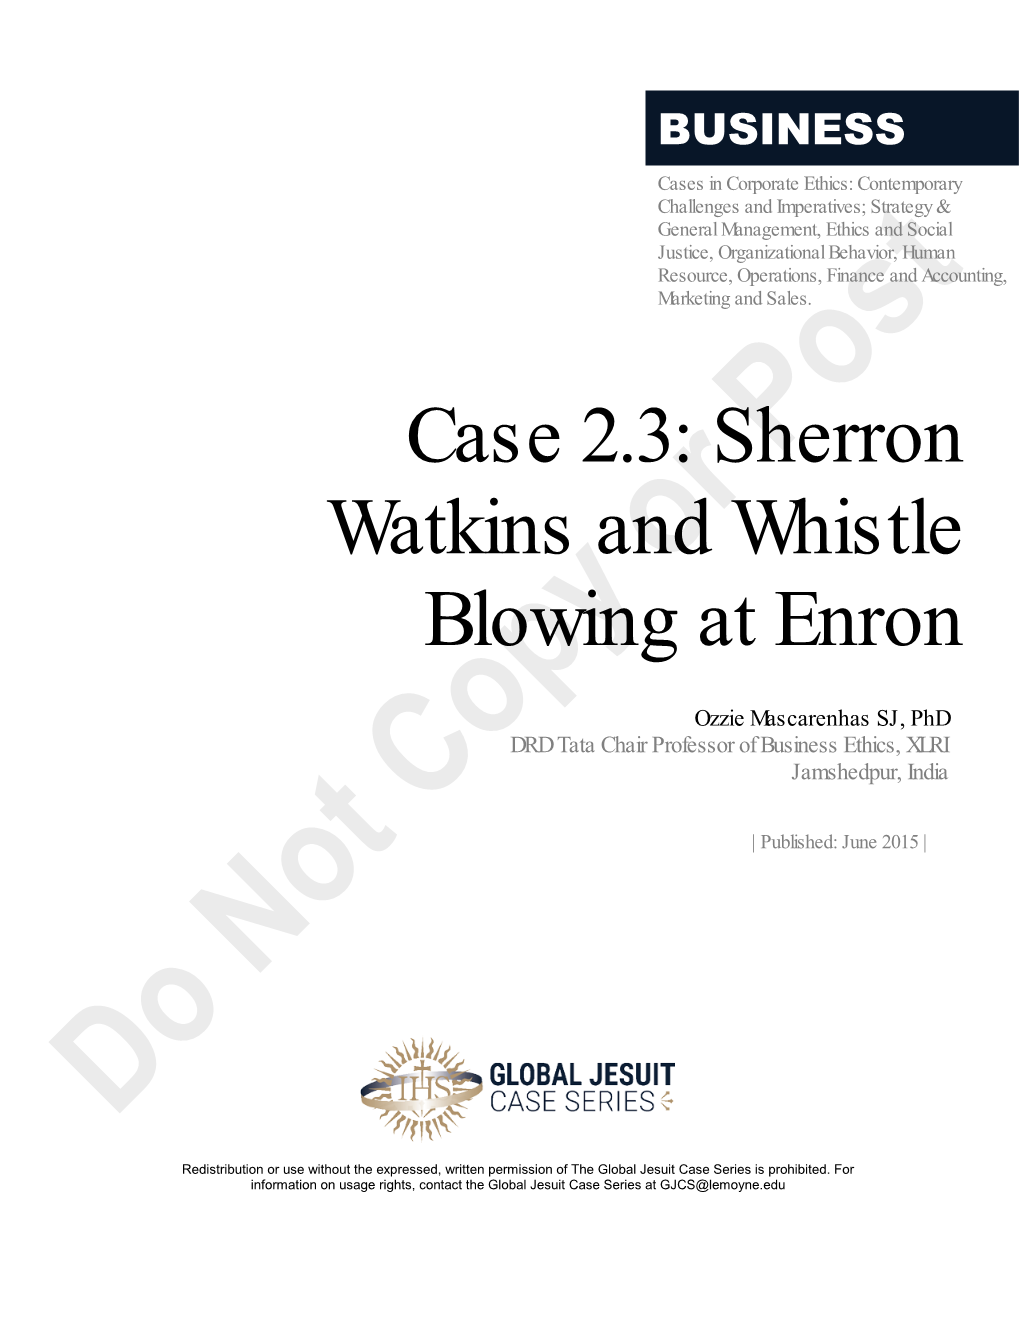 Sherron Watkins and Whistle Blowing at Enron Ethics of 3